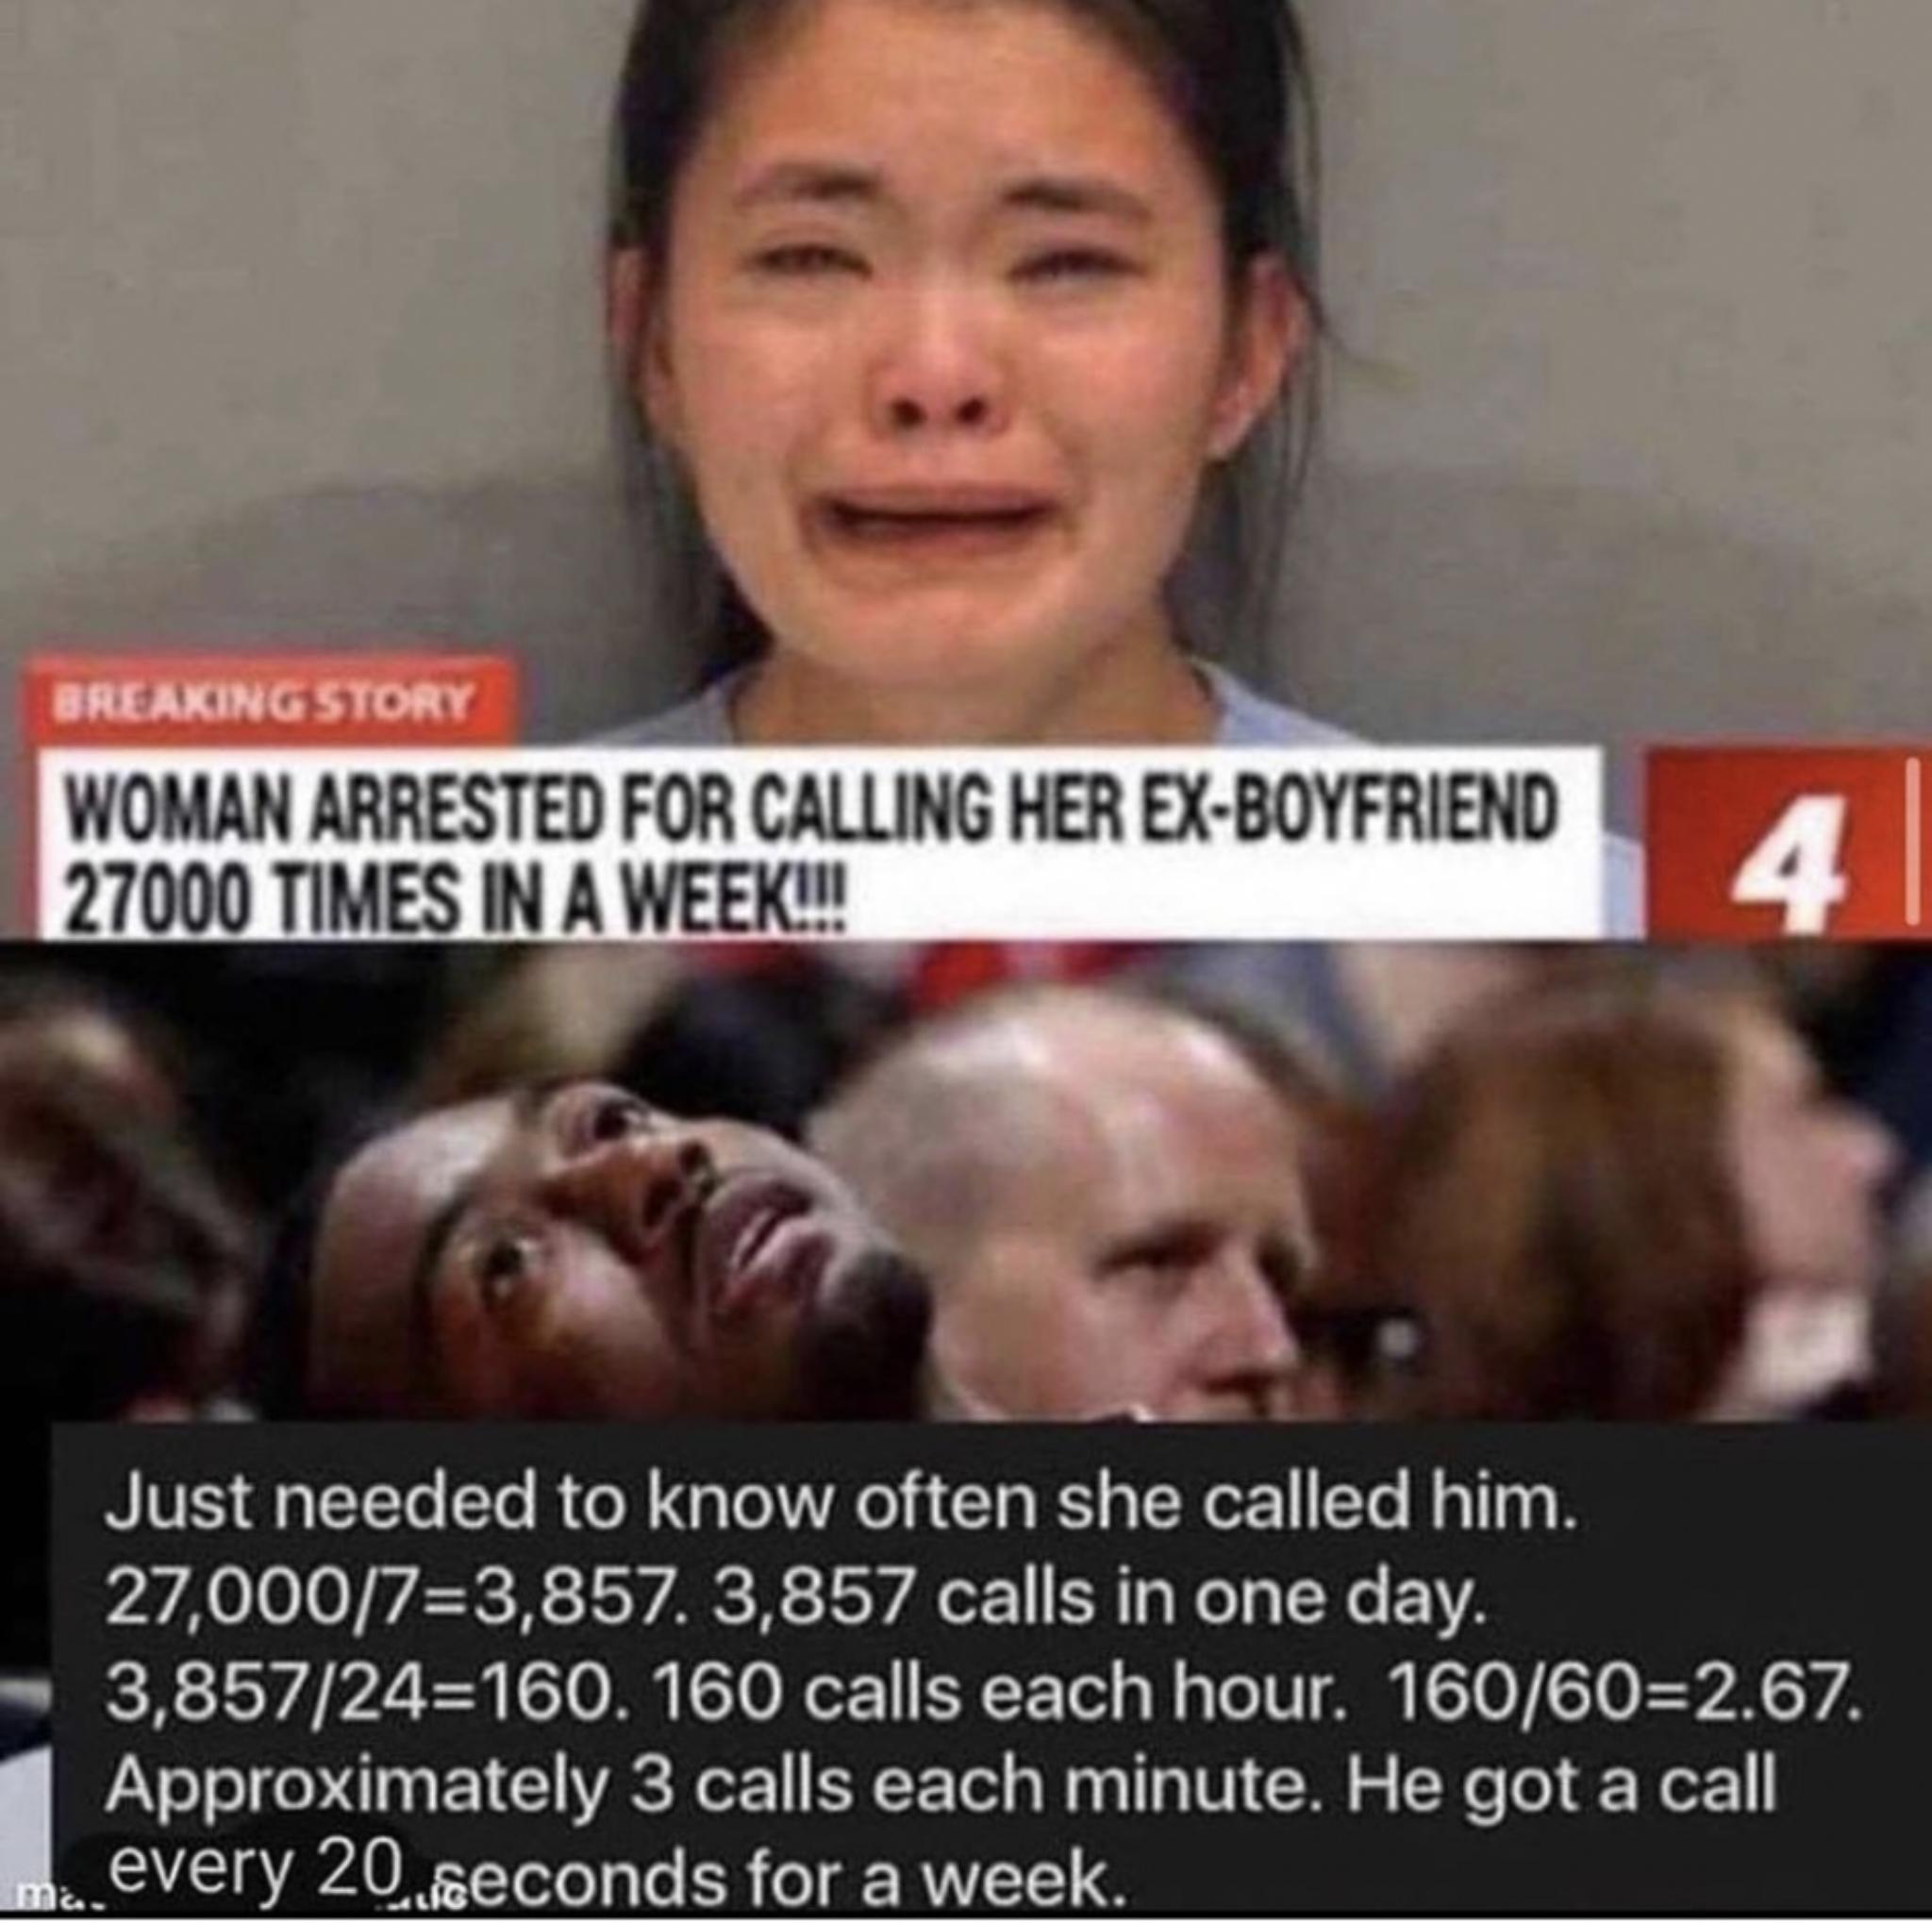 girl calls boyfriend 27000 times - Breaking Story Woman Arrested For Calling Her ExBoyfriend 27000 Times In A Week!!! 4 Just needed to know often she called him. 27,00073,857. 3,857 calls in one day. 3,85724160. 160 calls each hour. 160602.67. Approximate